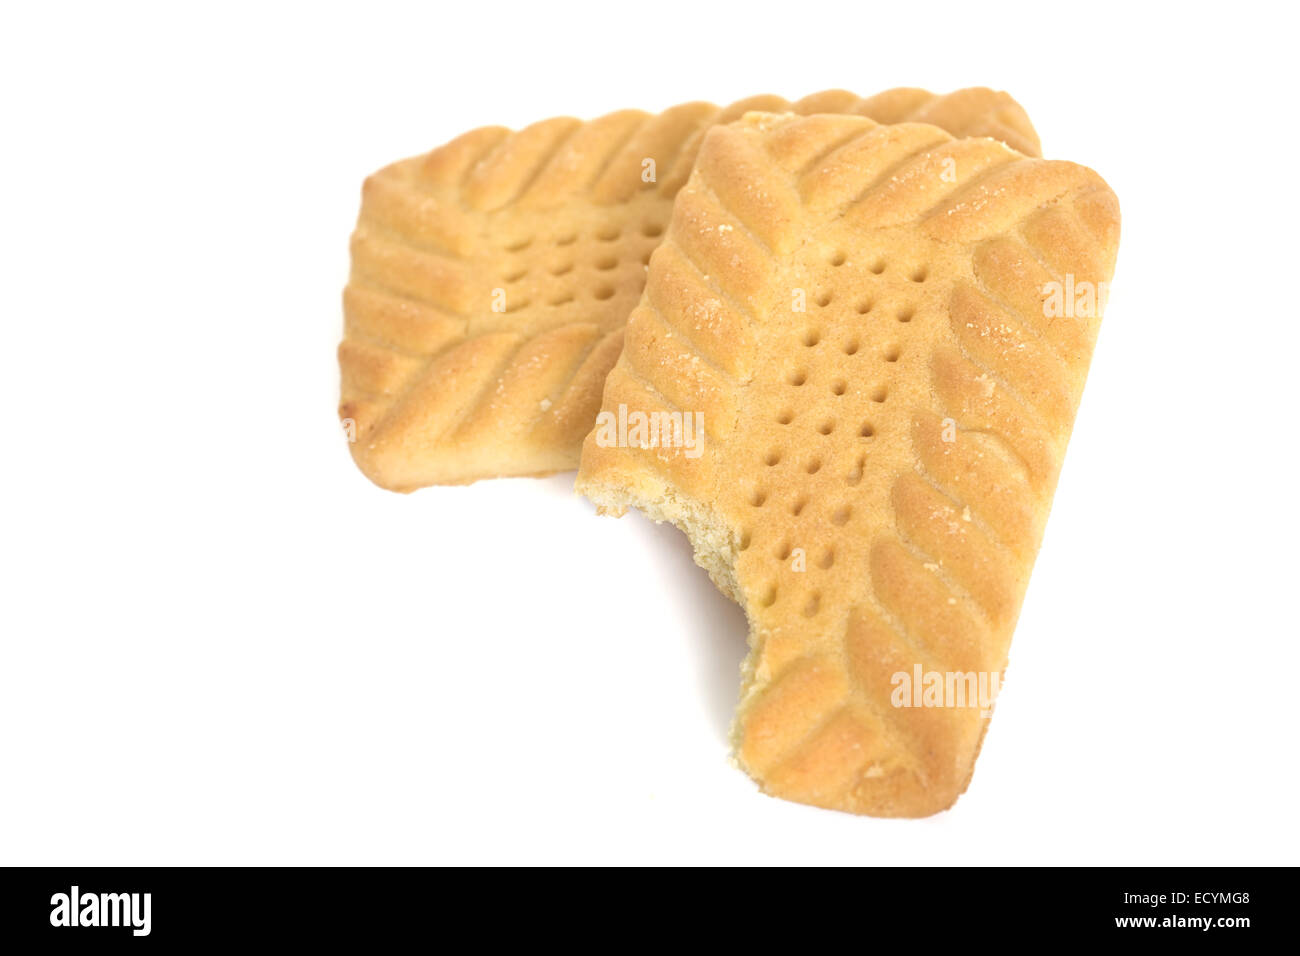 Two biscuits, one with a bite taken out of it. Stock Photo